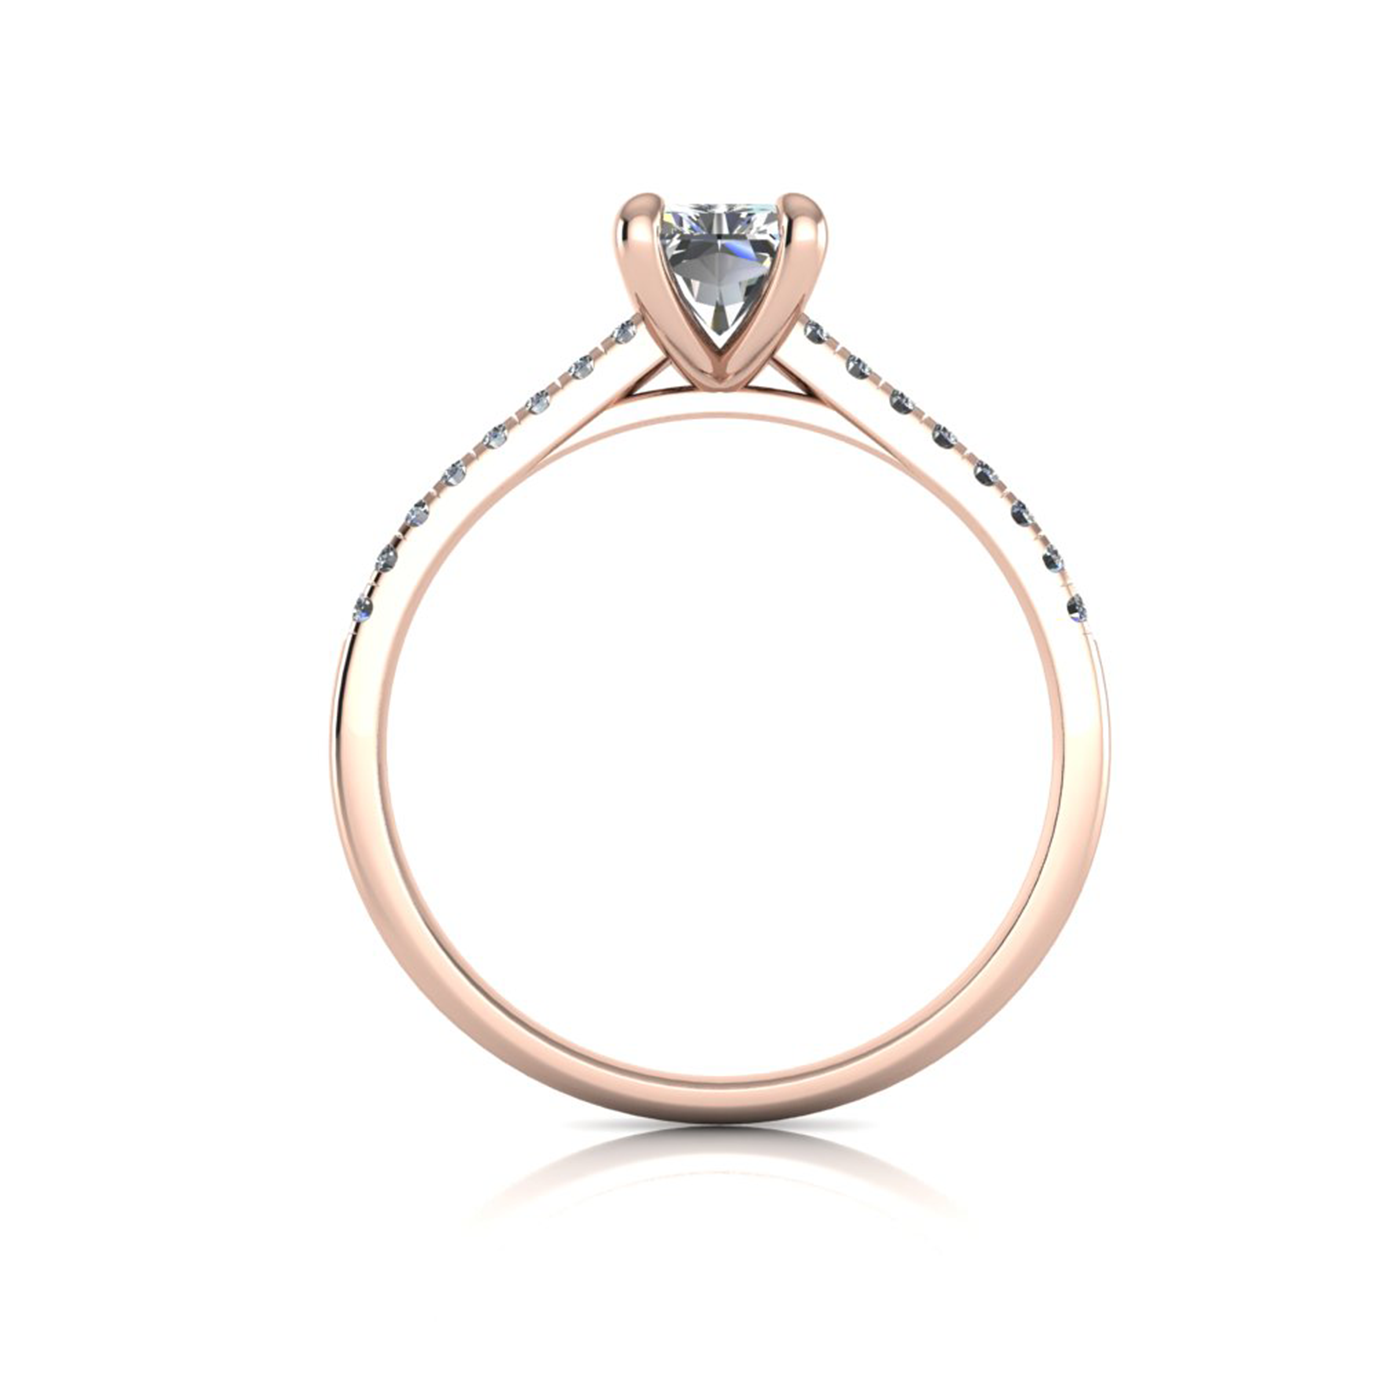 18K ROSE GOLD 4 PRONGS RADIANT CUT DIAMOND ENGAGEMENT RING WITH WHISPER THIN PAVÉ SET BAND